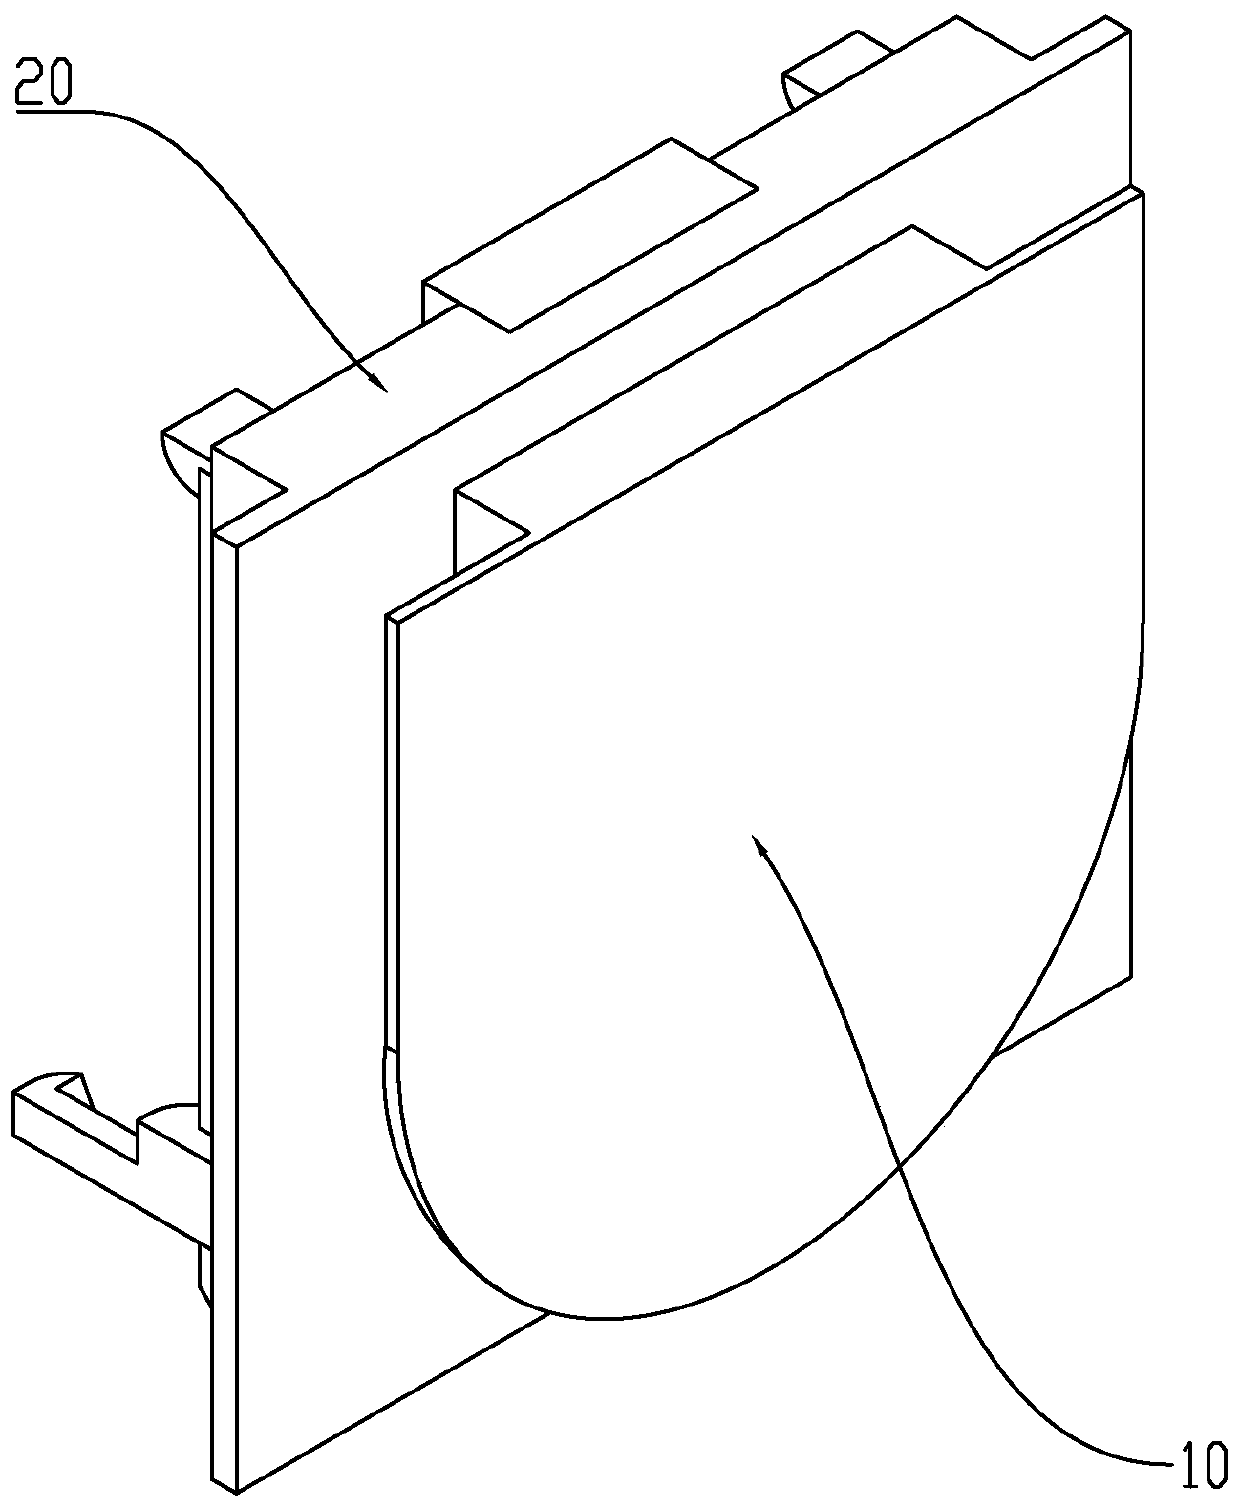 Folding anti-counterfeiting buckle structure